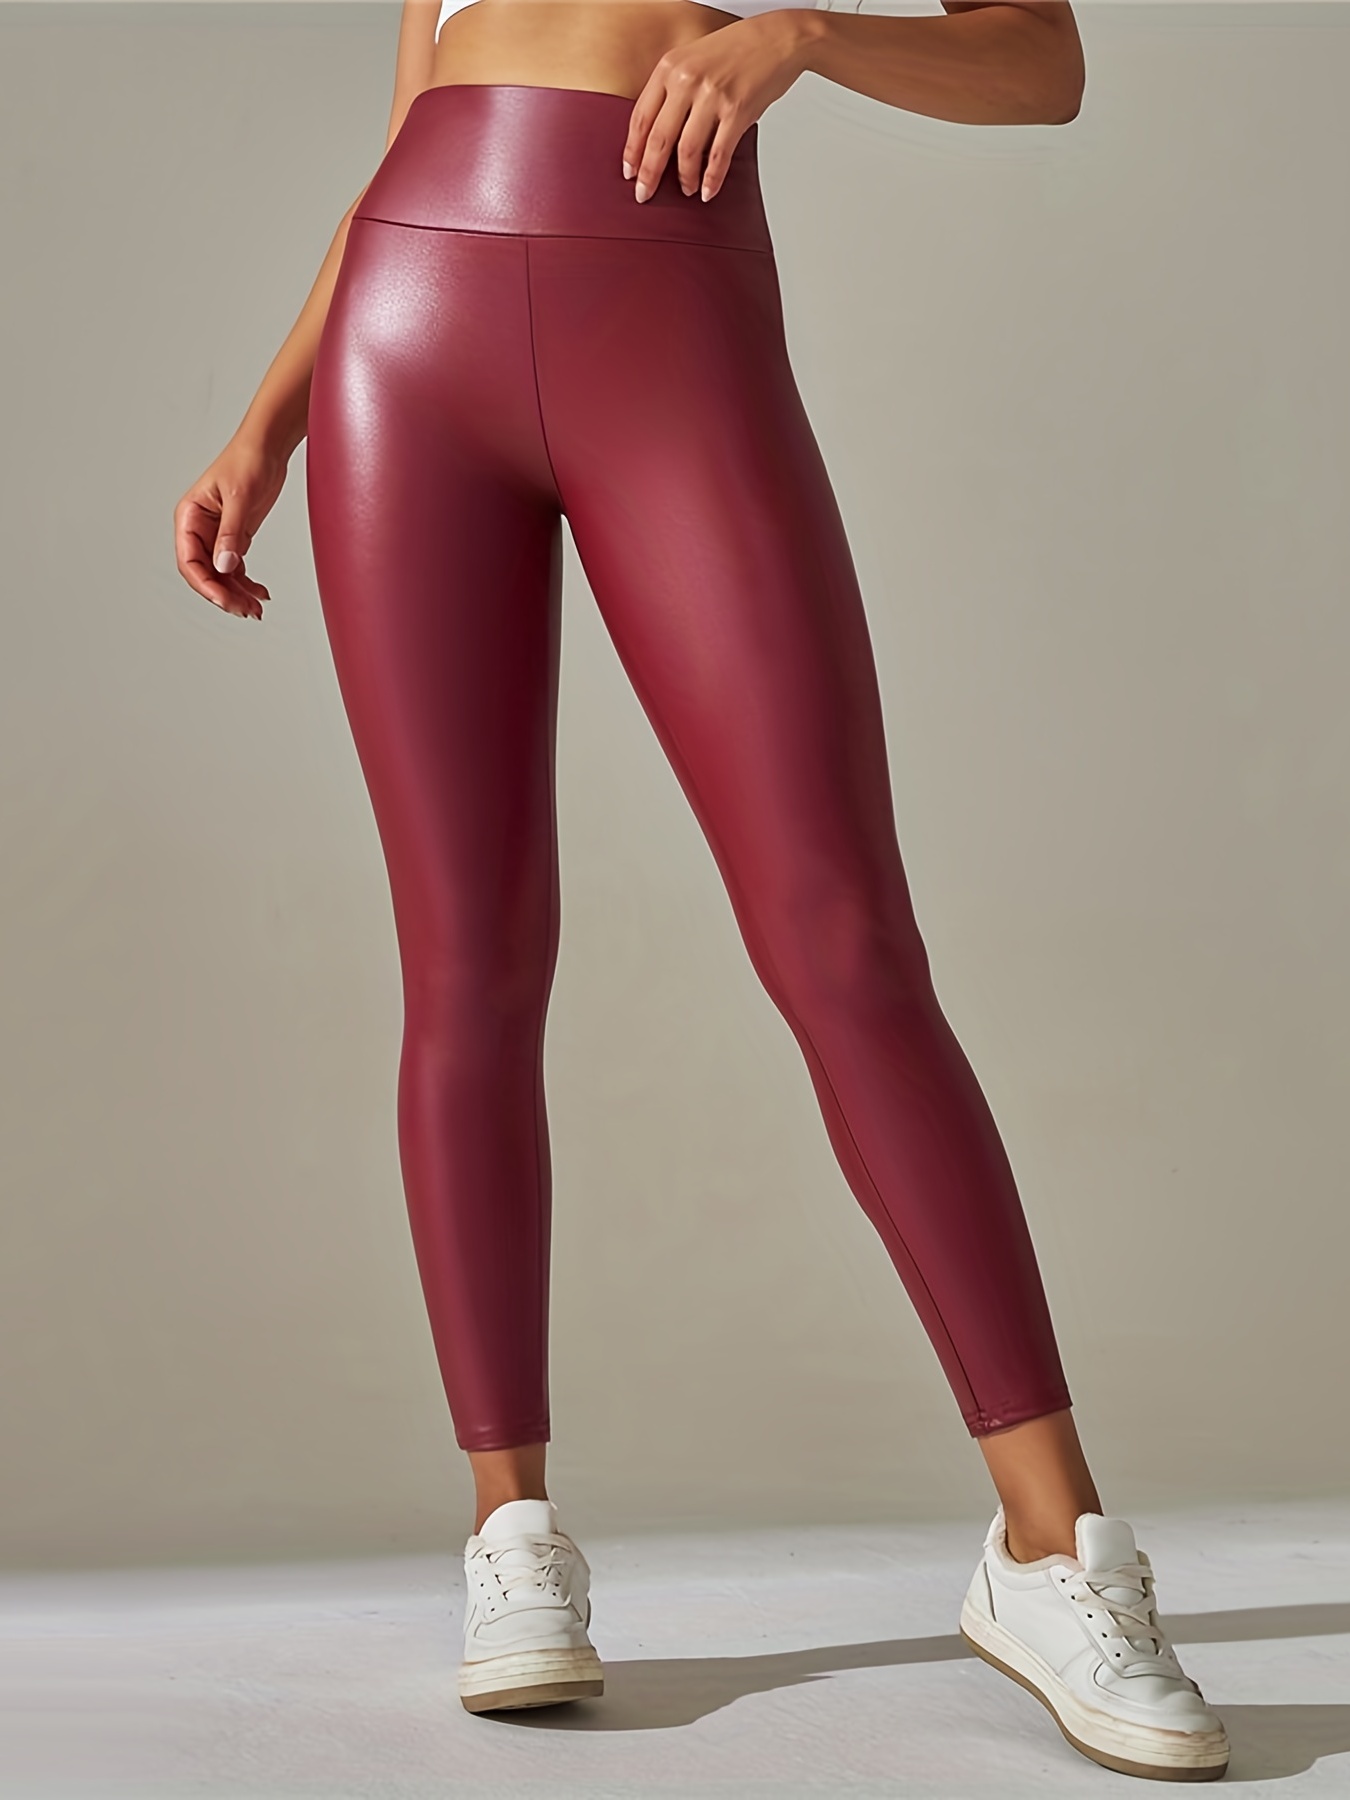 Crazy4bling Cover Girl Burgundy Wine Shiny Leather Look Yoga Workout  Leggings, X-Small